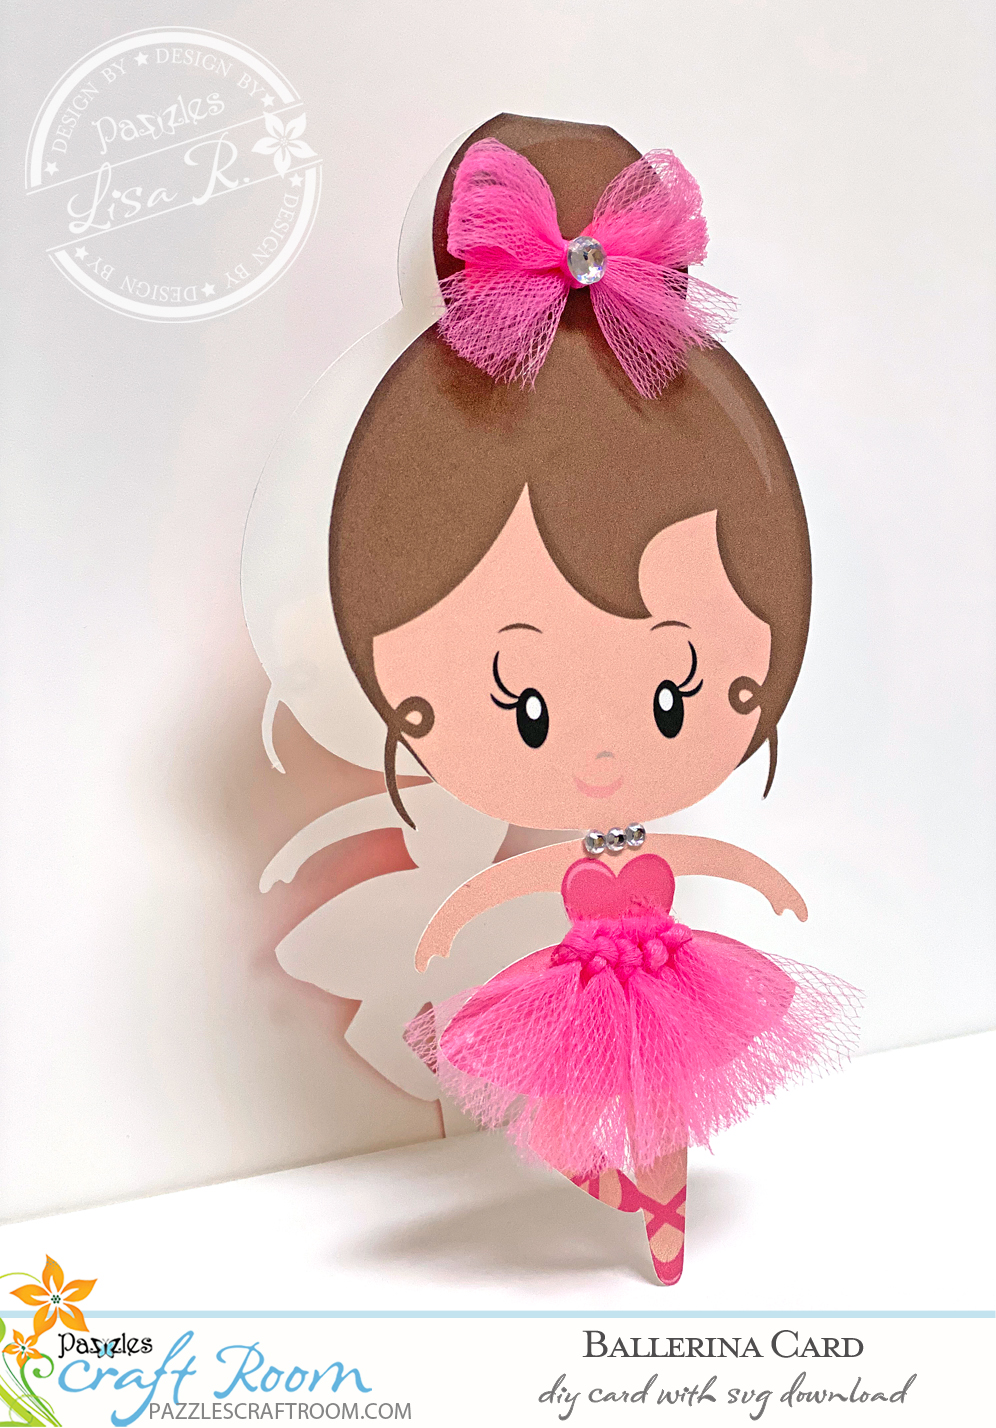 Pazzles DIY Ballerina Card with instant SVG download. Compatible with all major electronic cutters including Pazzles Inspiration, Cricut, Silhouette Cameo. Design by Lisa Reyna.